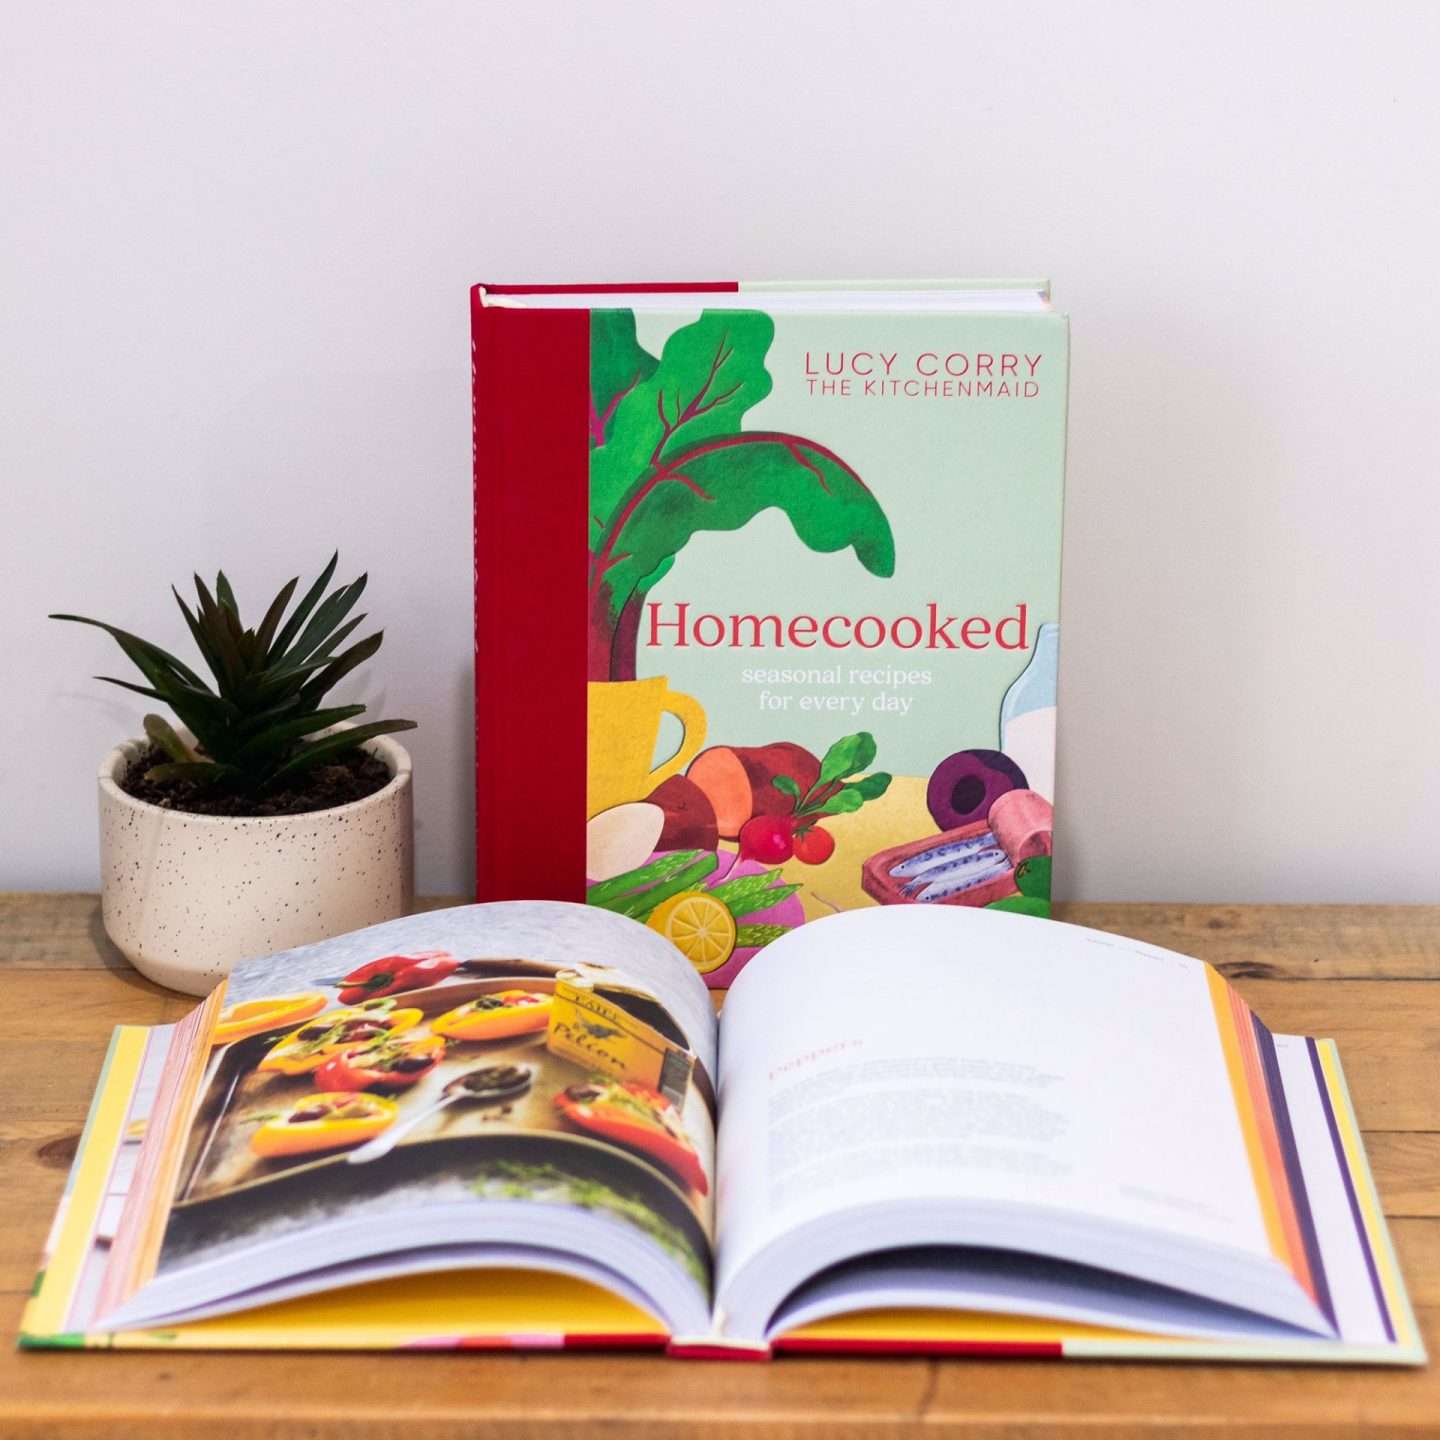 Homecooked wins 2022 NZ Booklovers Award